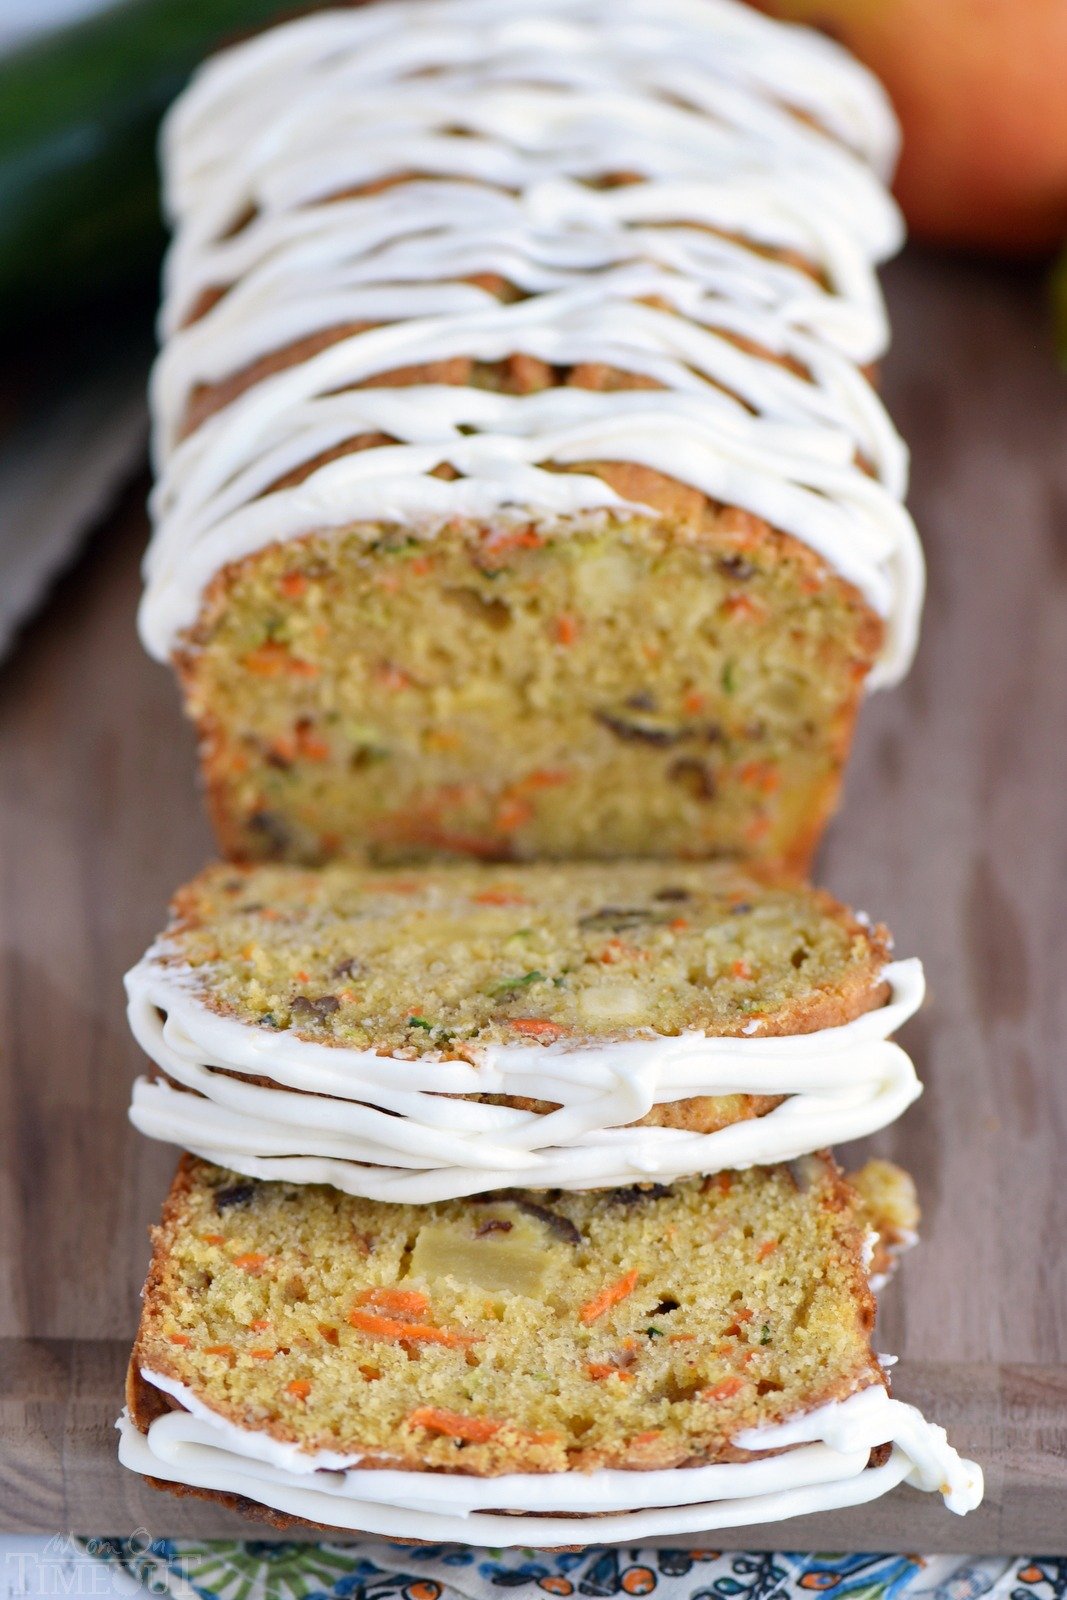 This Carrot Apple Zucchini Bread recipe is incredibly moist and flavorful! Vibrant colors from the carrot, apple, and zucchini makes this quick bread irresisitble!  Sure to be a new favorite! // Mom On Timeout